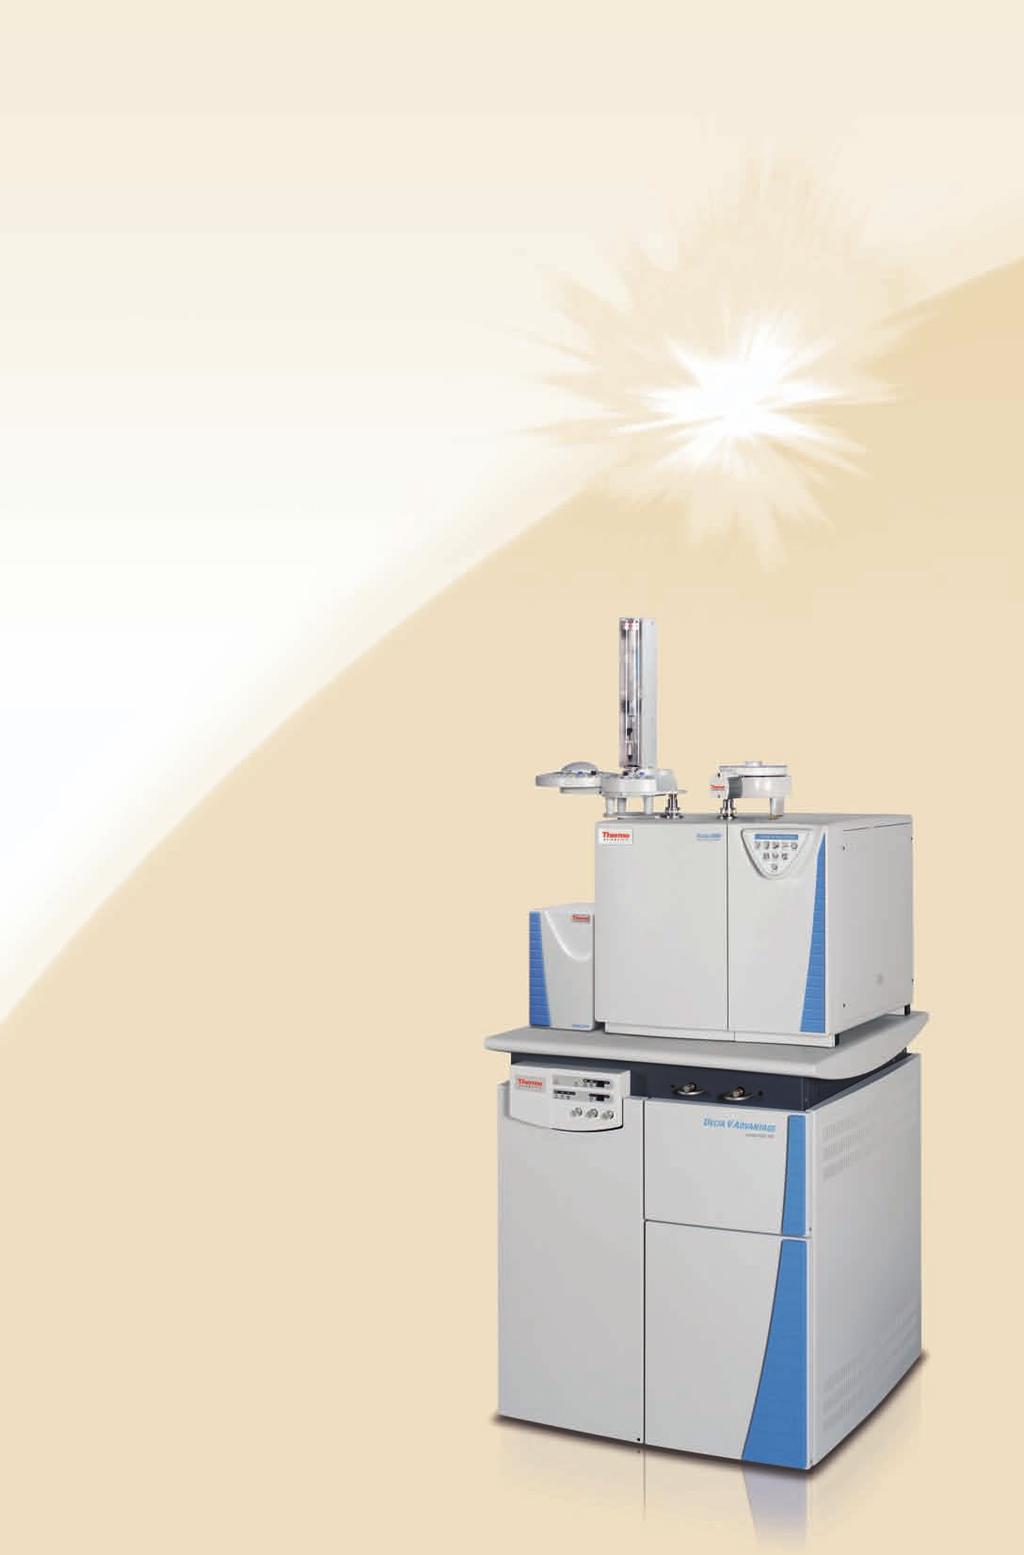 Analytical Setups The FLASH HT Plus supports many different analytical setups C, N and S simultaneous isotope analysis (triple analysis) Using a dedicated reactor for sulfur analysis and an optimized